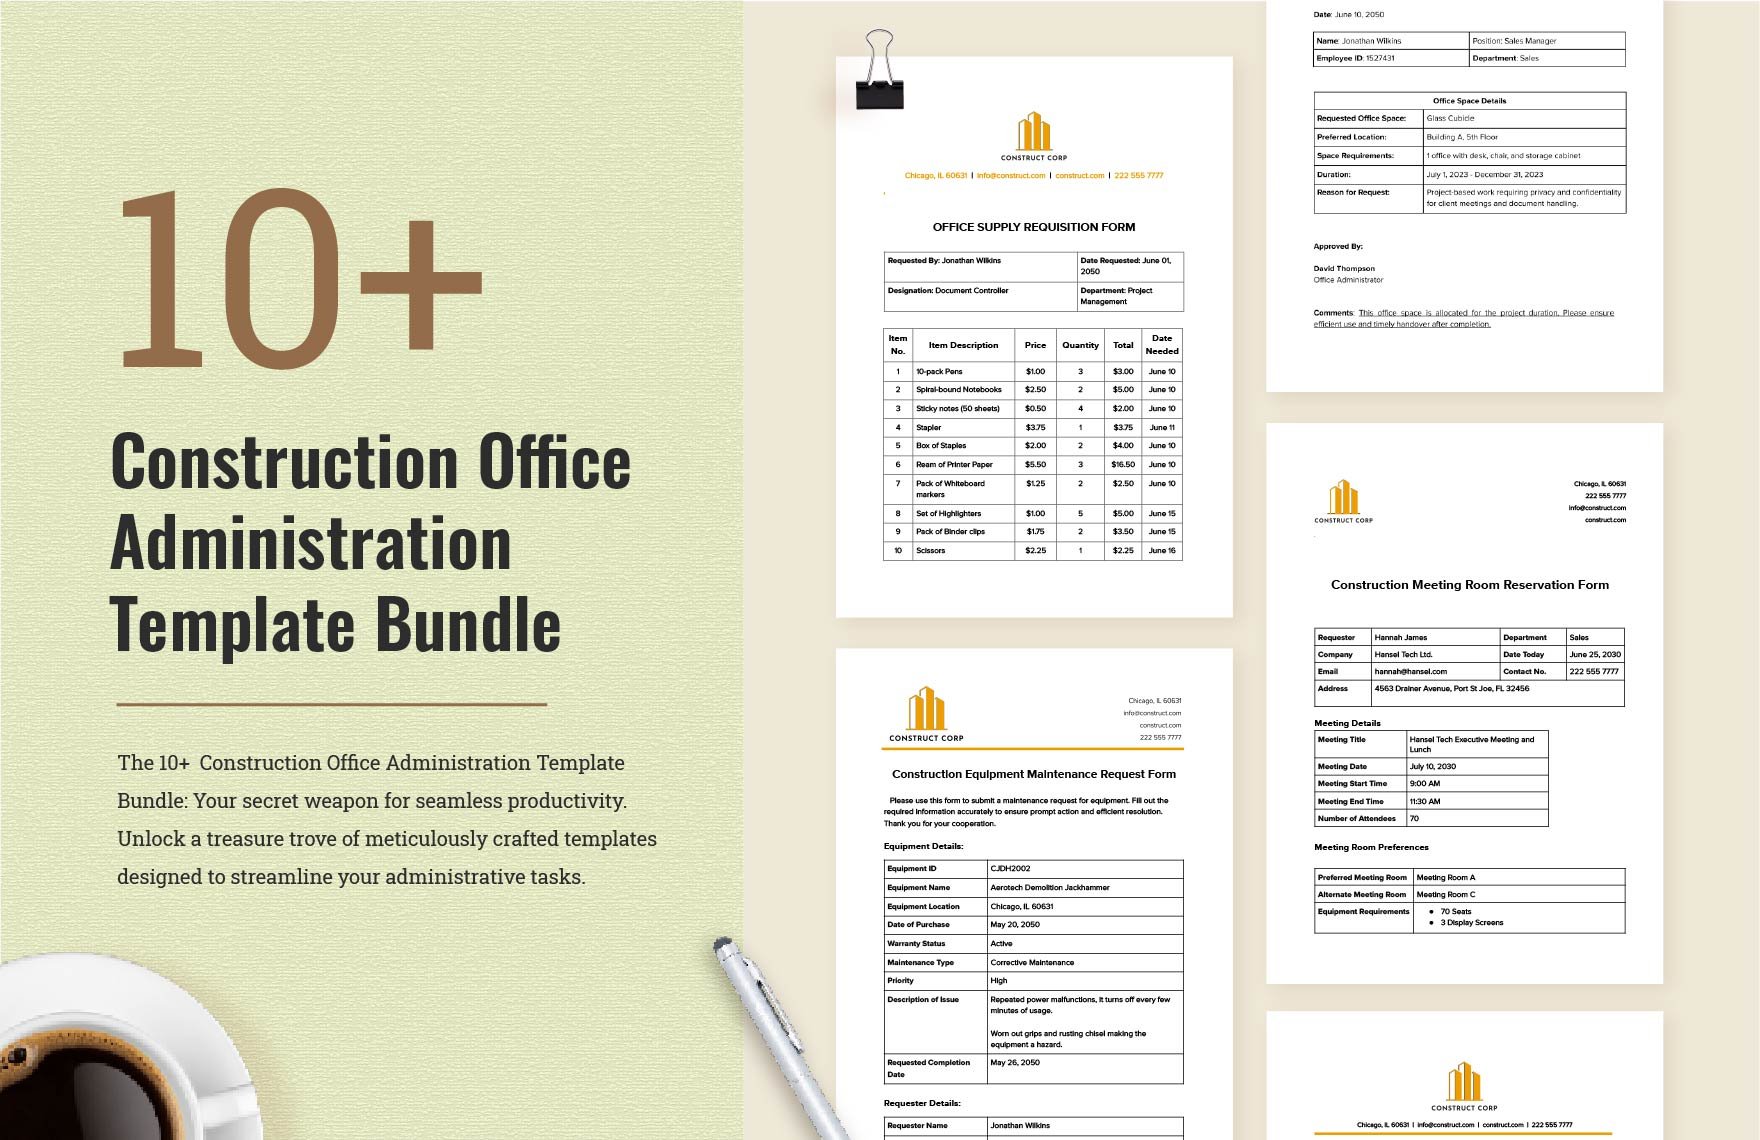  10+ Construction Office Administration Template Bundle